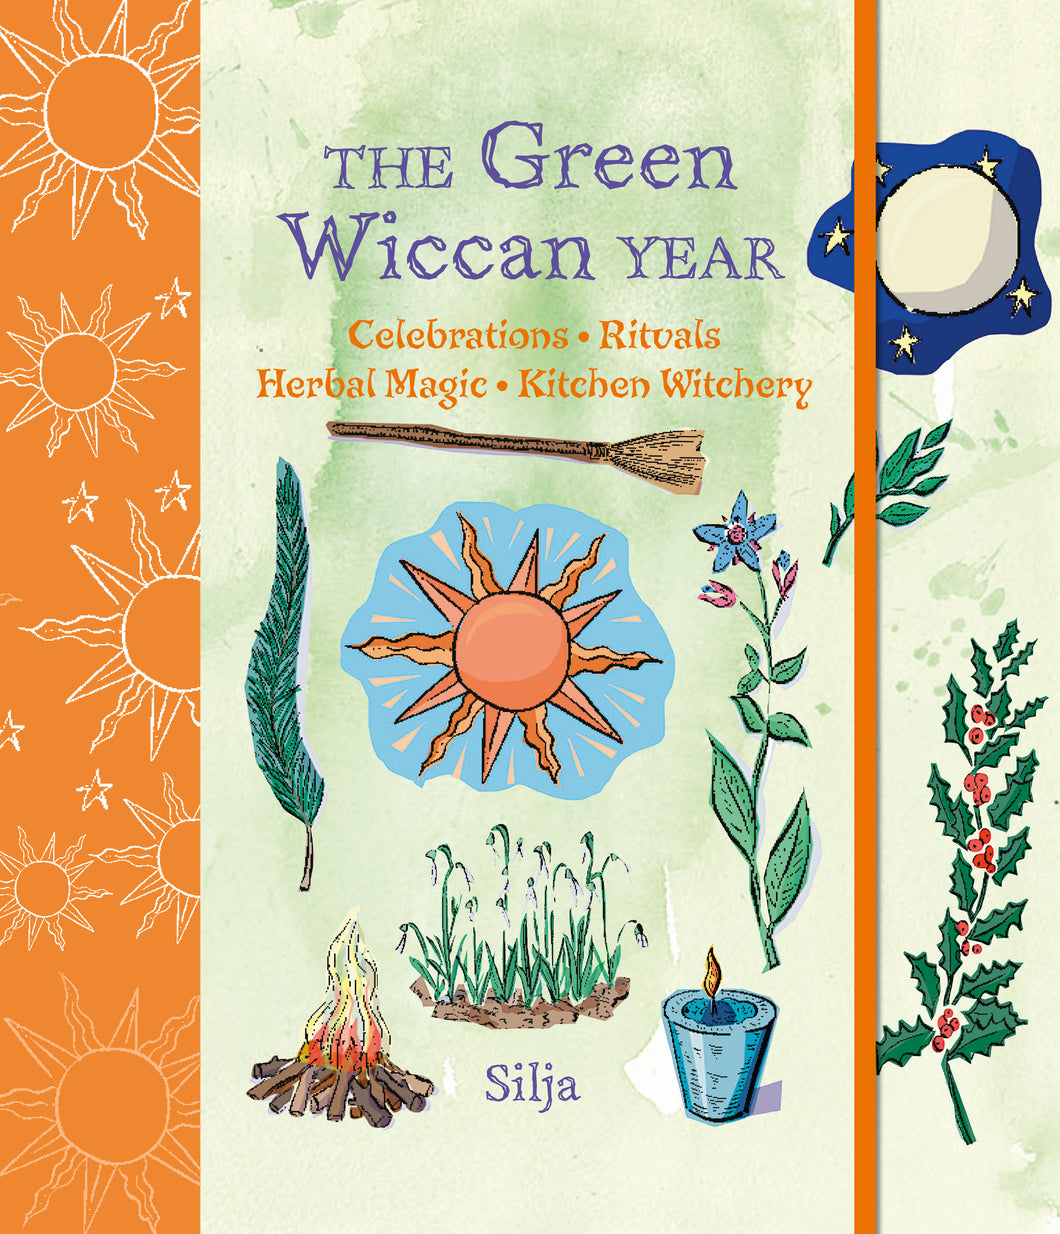 The Green Wiccan Year